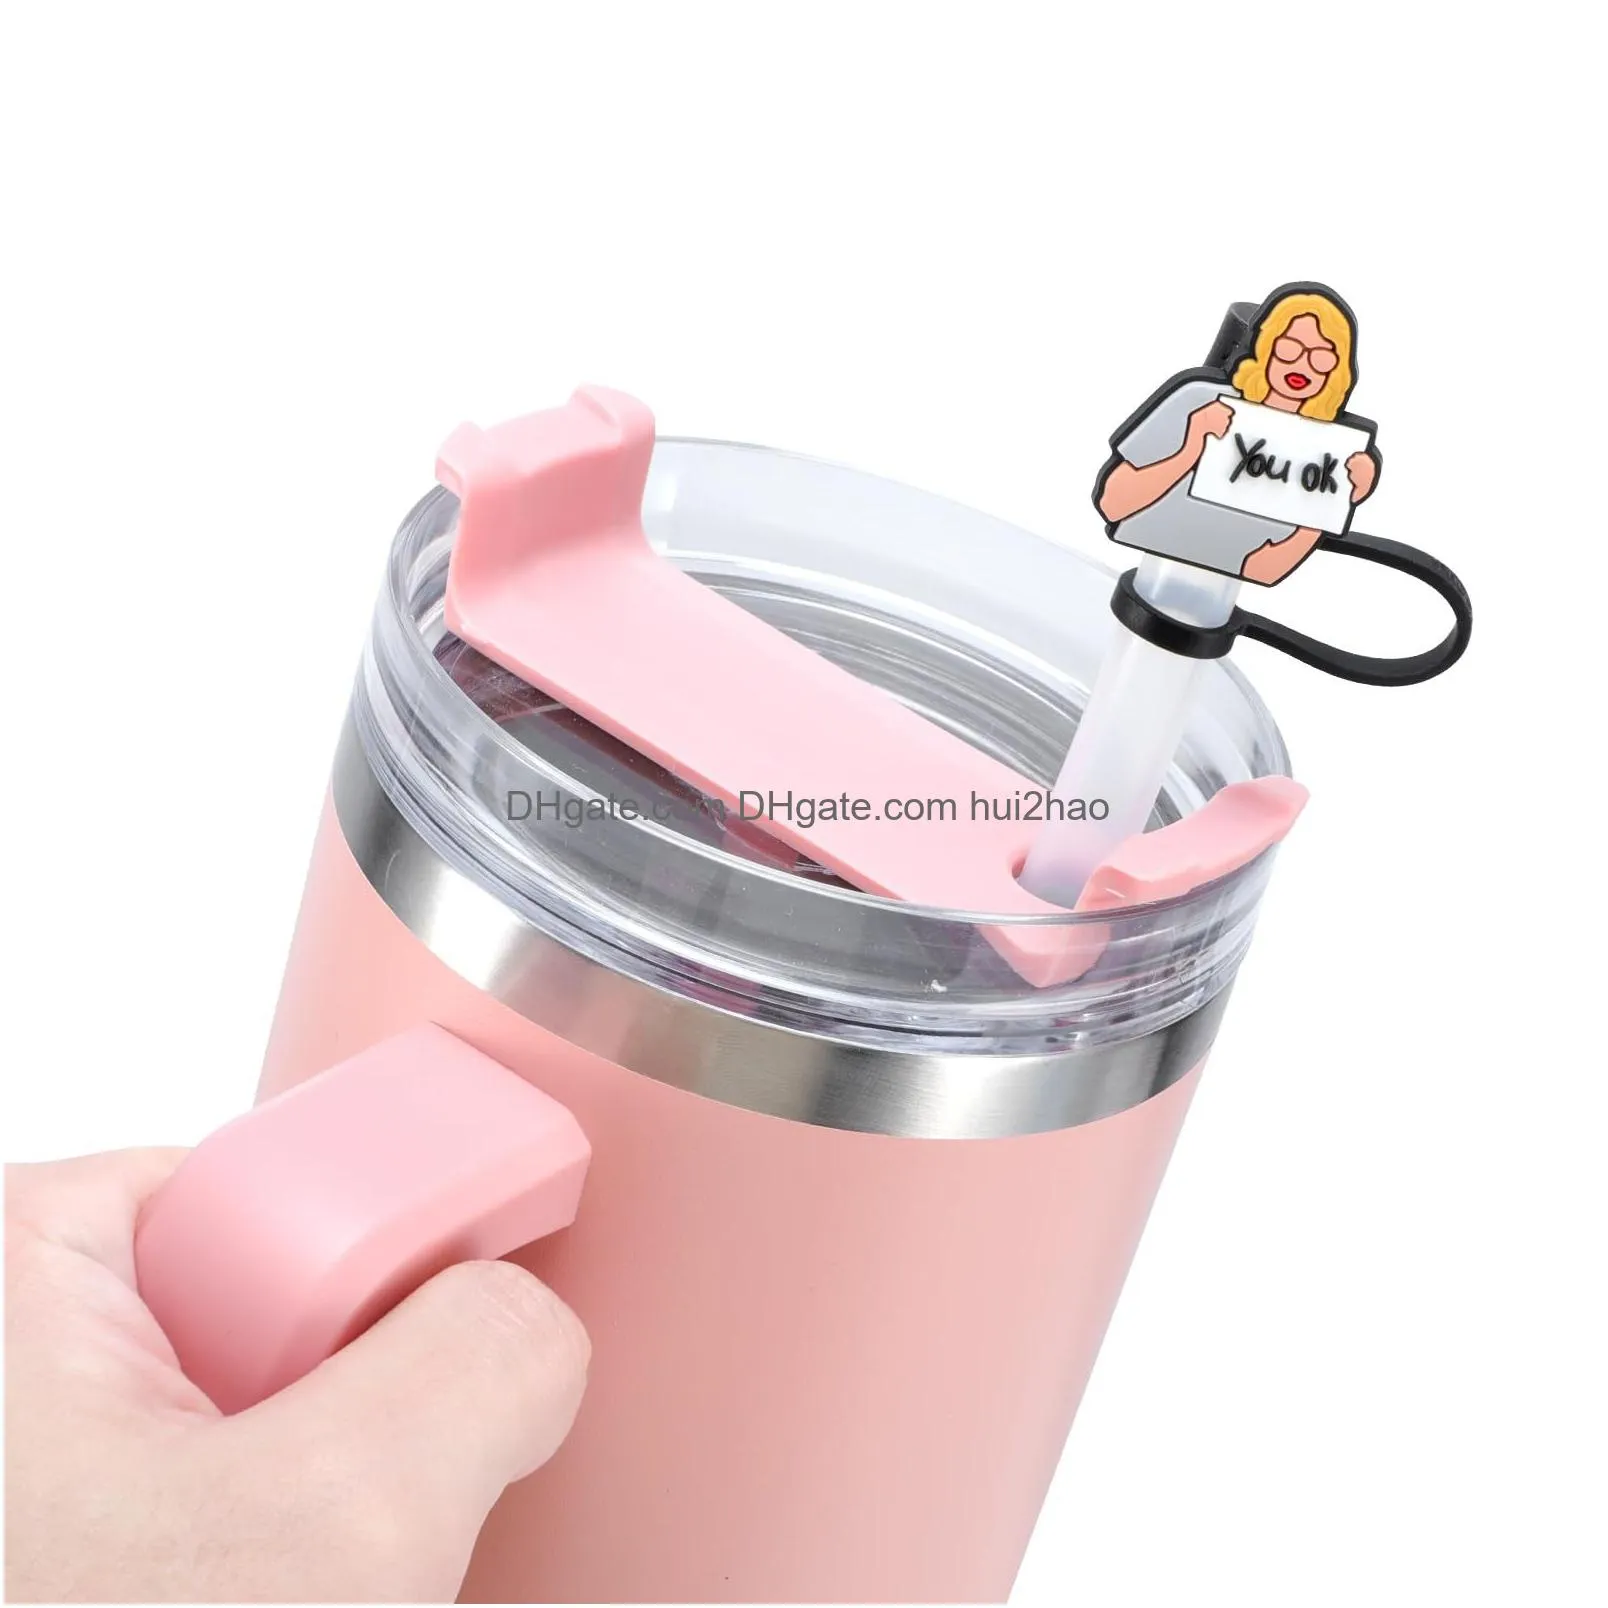 Other Drinkware Letter Charm Accessories For 40Oz Cup Initial Name Id Personalized Handle Tumbler Wll2204 Drop Delivery Home Garden Ki Dhdz0